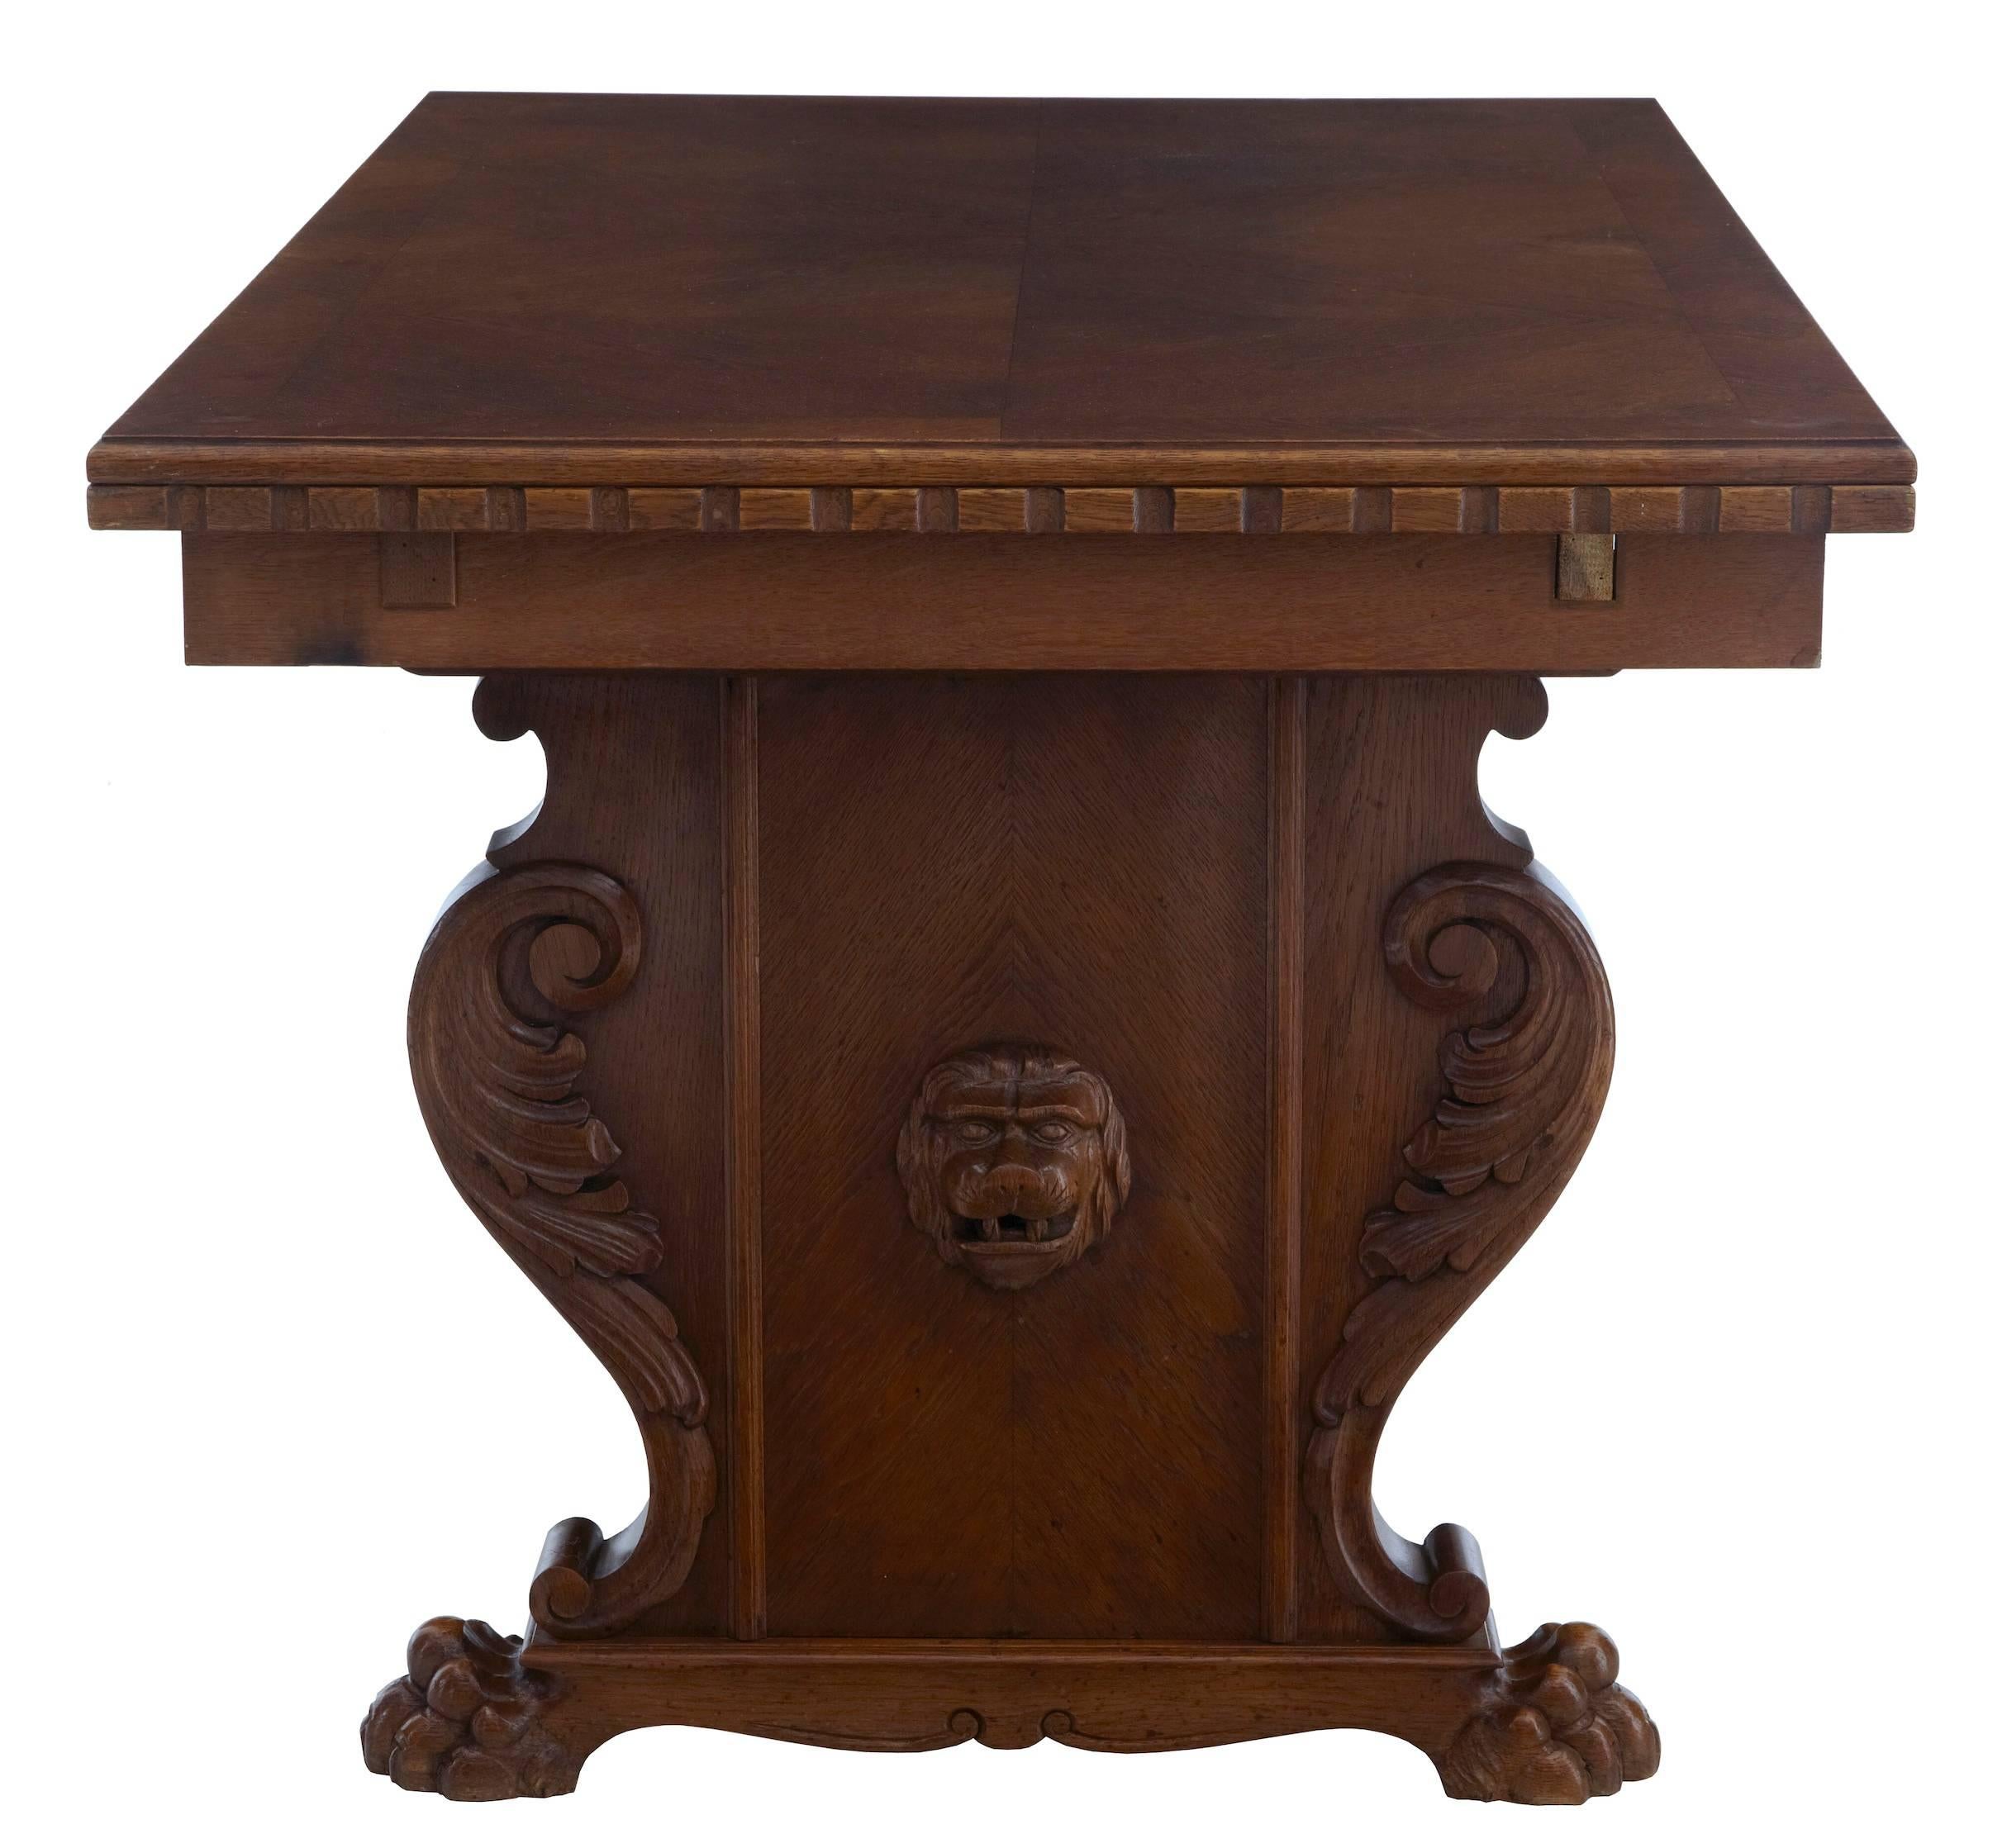 Carved oak trestle end table, oak top with pine draw-leaf slides.
Applied carved scrolls and lion head, standing on carved lion paw feet.
Some surface marks to top surface.
Measures:
Height: 29